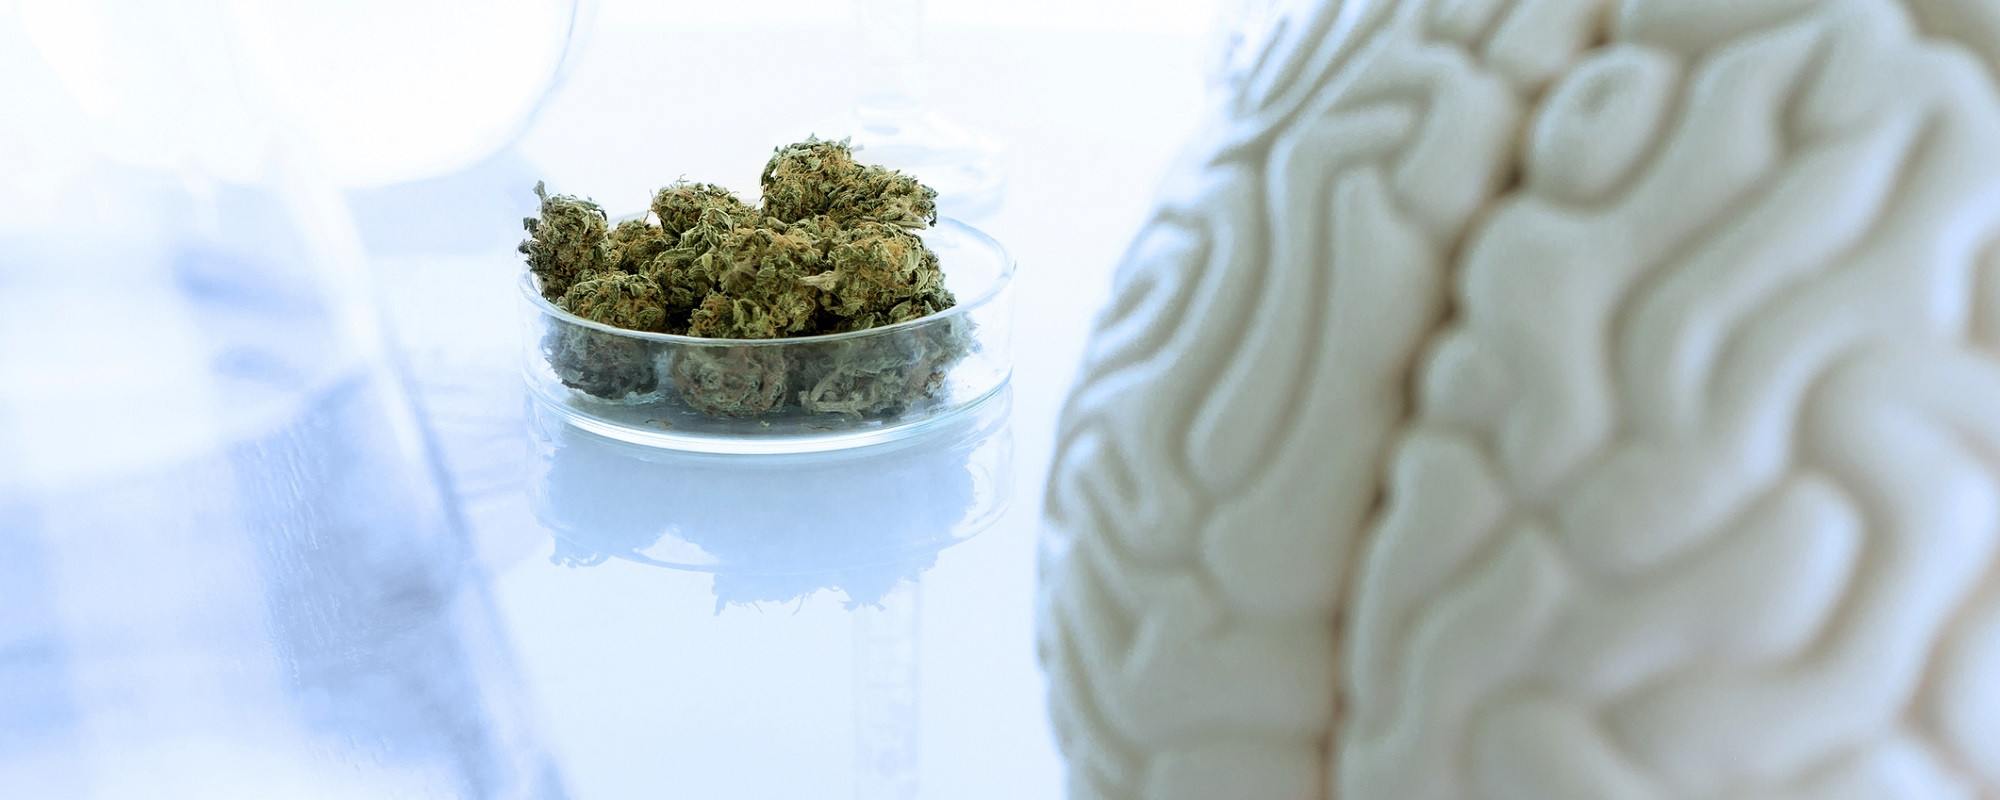 The Effects of Cannabis on Brain Development: Research Outlook